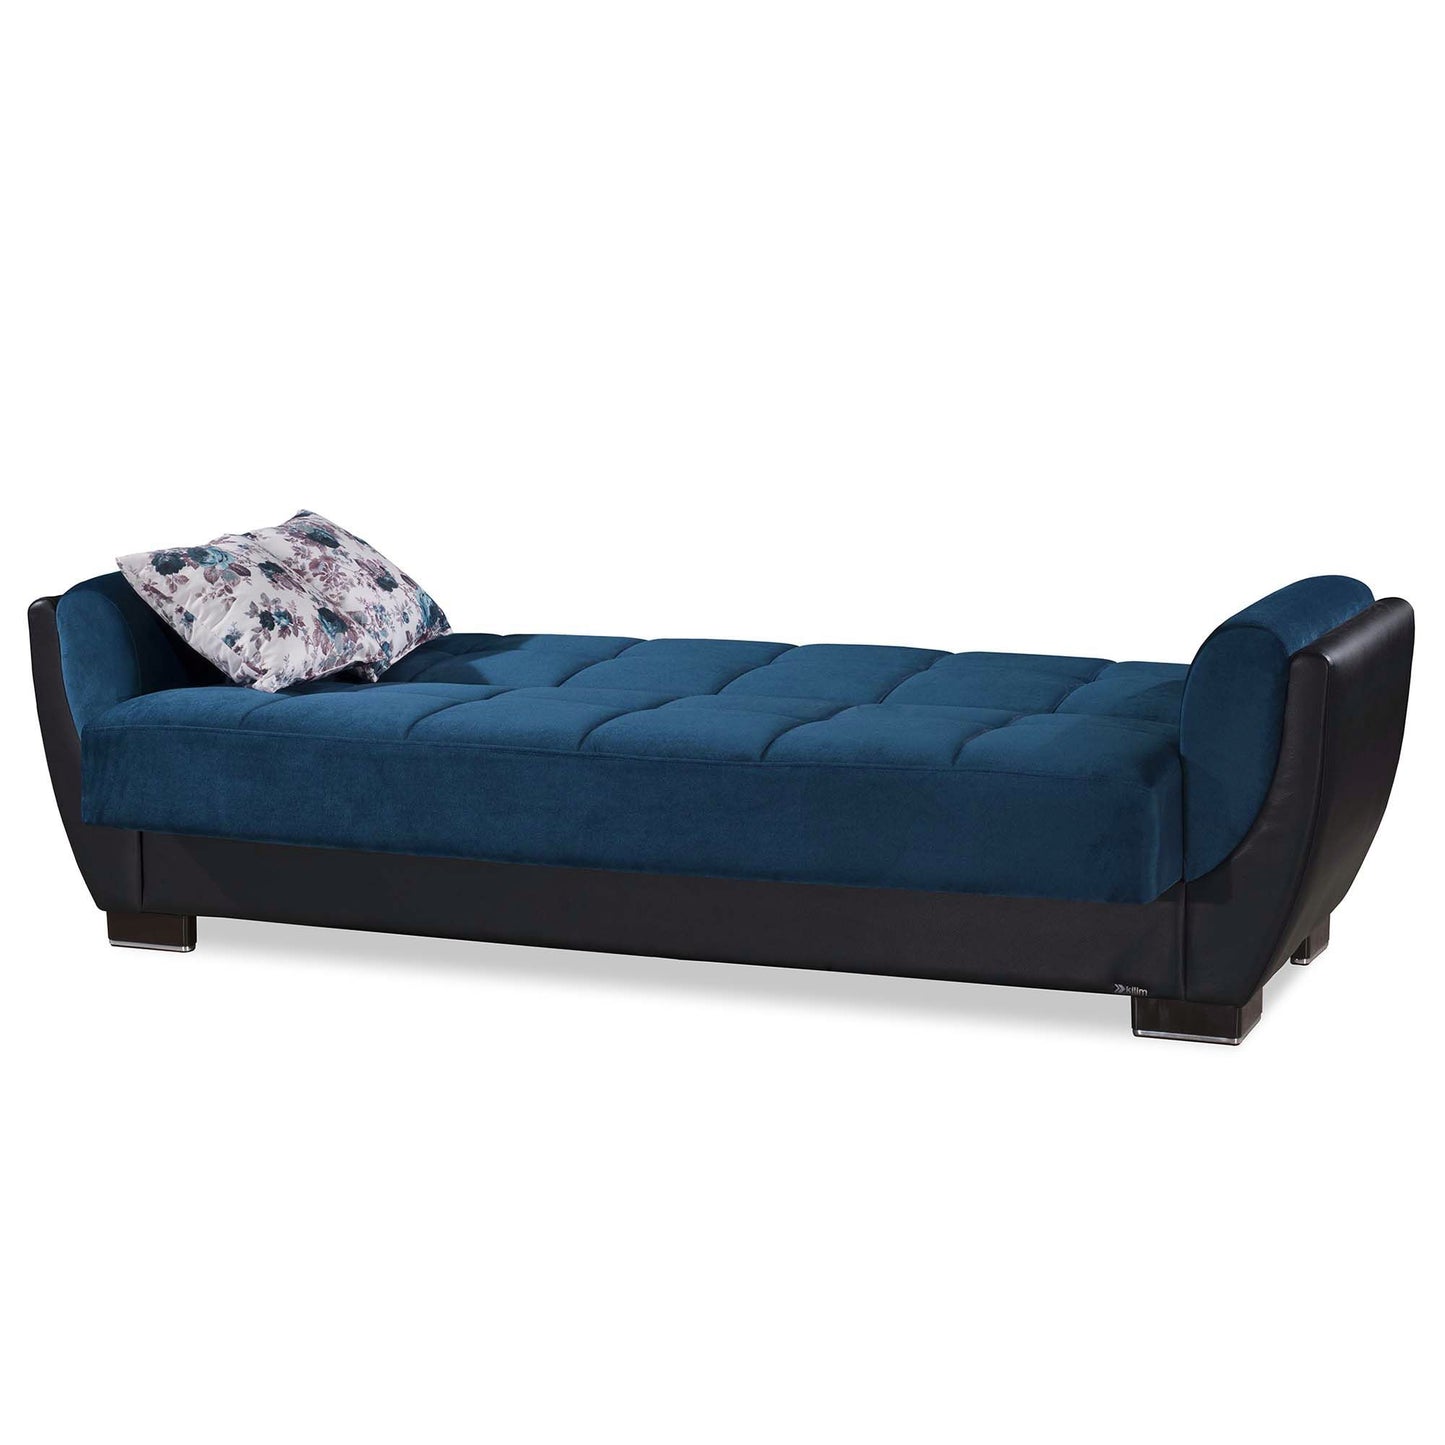 Ottomanson Classics Air Convertible Sofabed